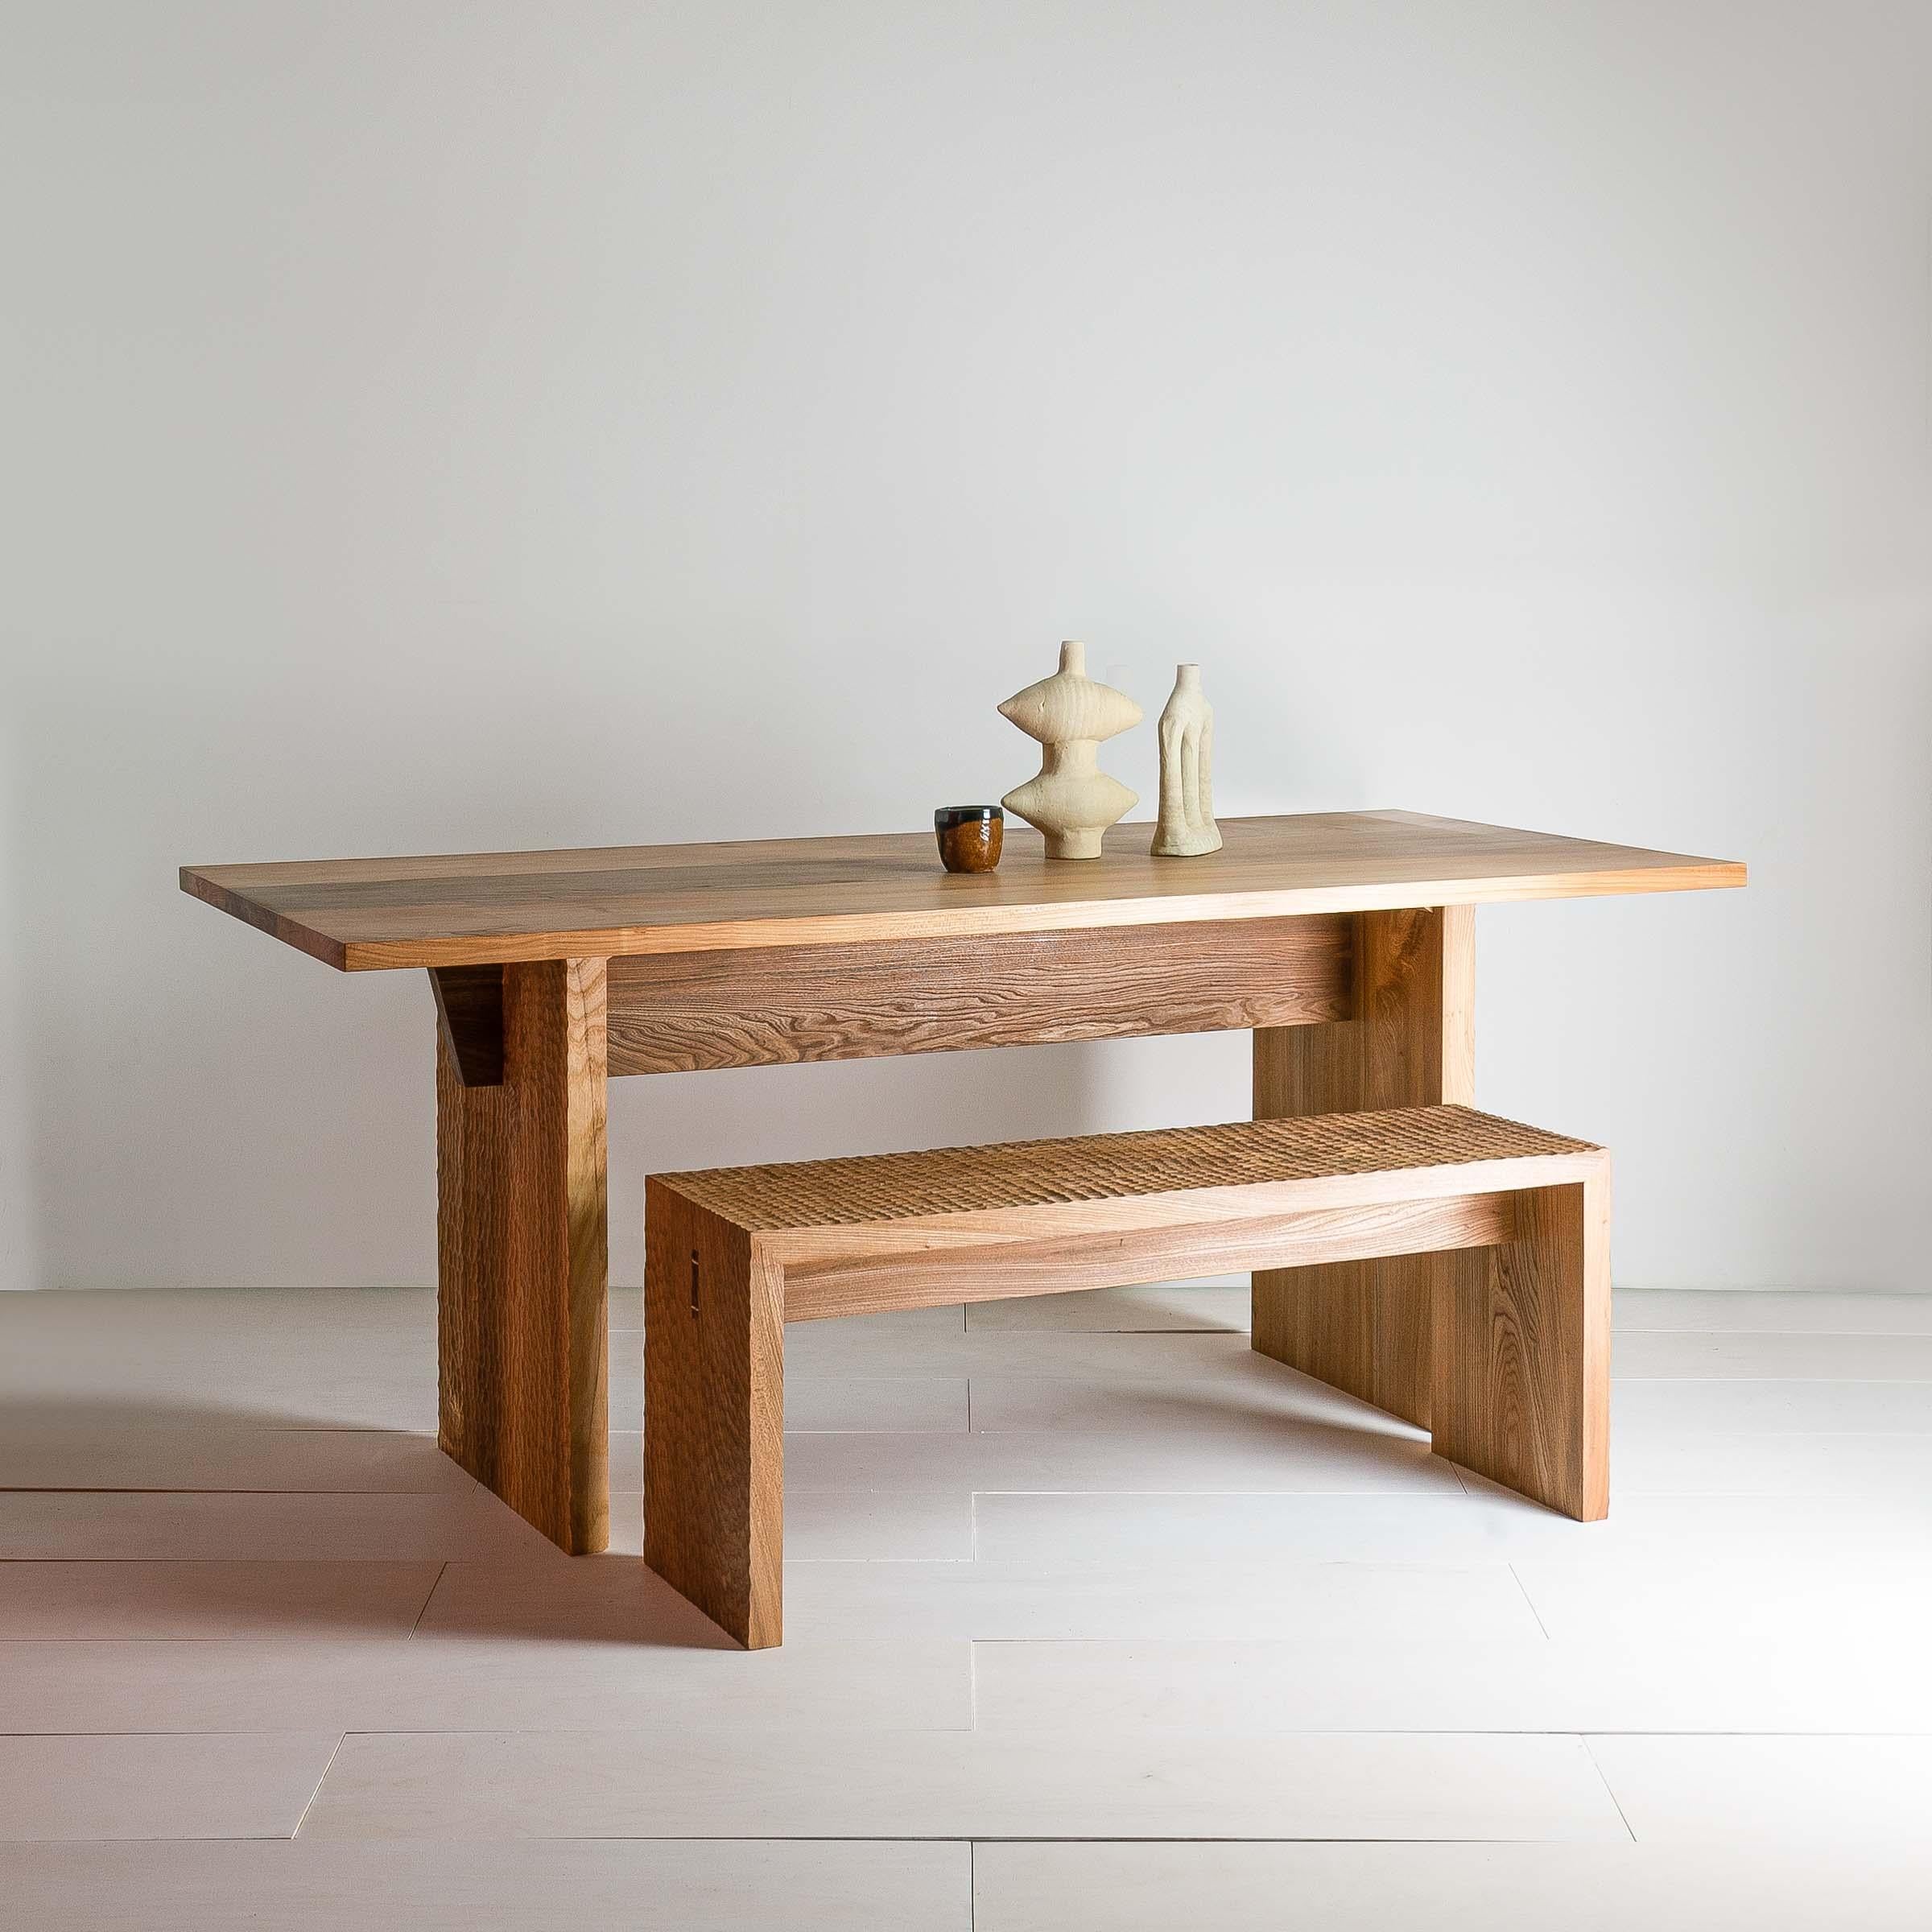 British Leto Elm Dining Table, with Hand Carved Texturing, by Mythology For Sale